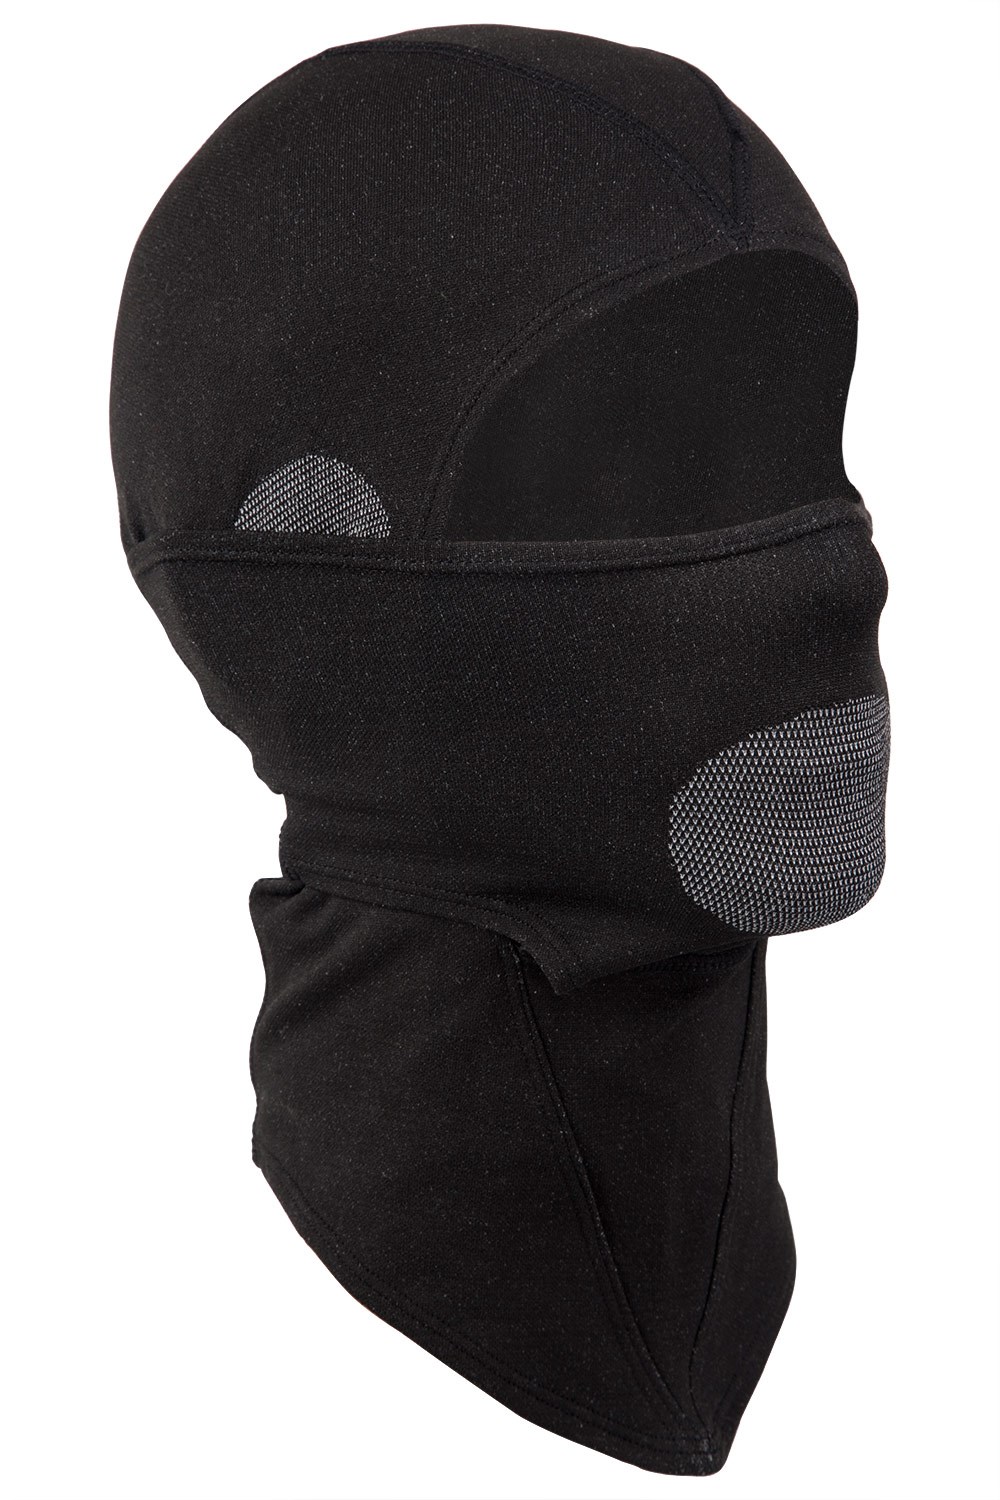 Dust  Cold Breathable Mountain Warehouse Merino Balaclava Protection from  Wind Lightweight Winter Ski Mask Warm Neck Warmer Naturally Antibacterial  Face Mask cancer.org.in